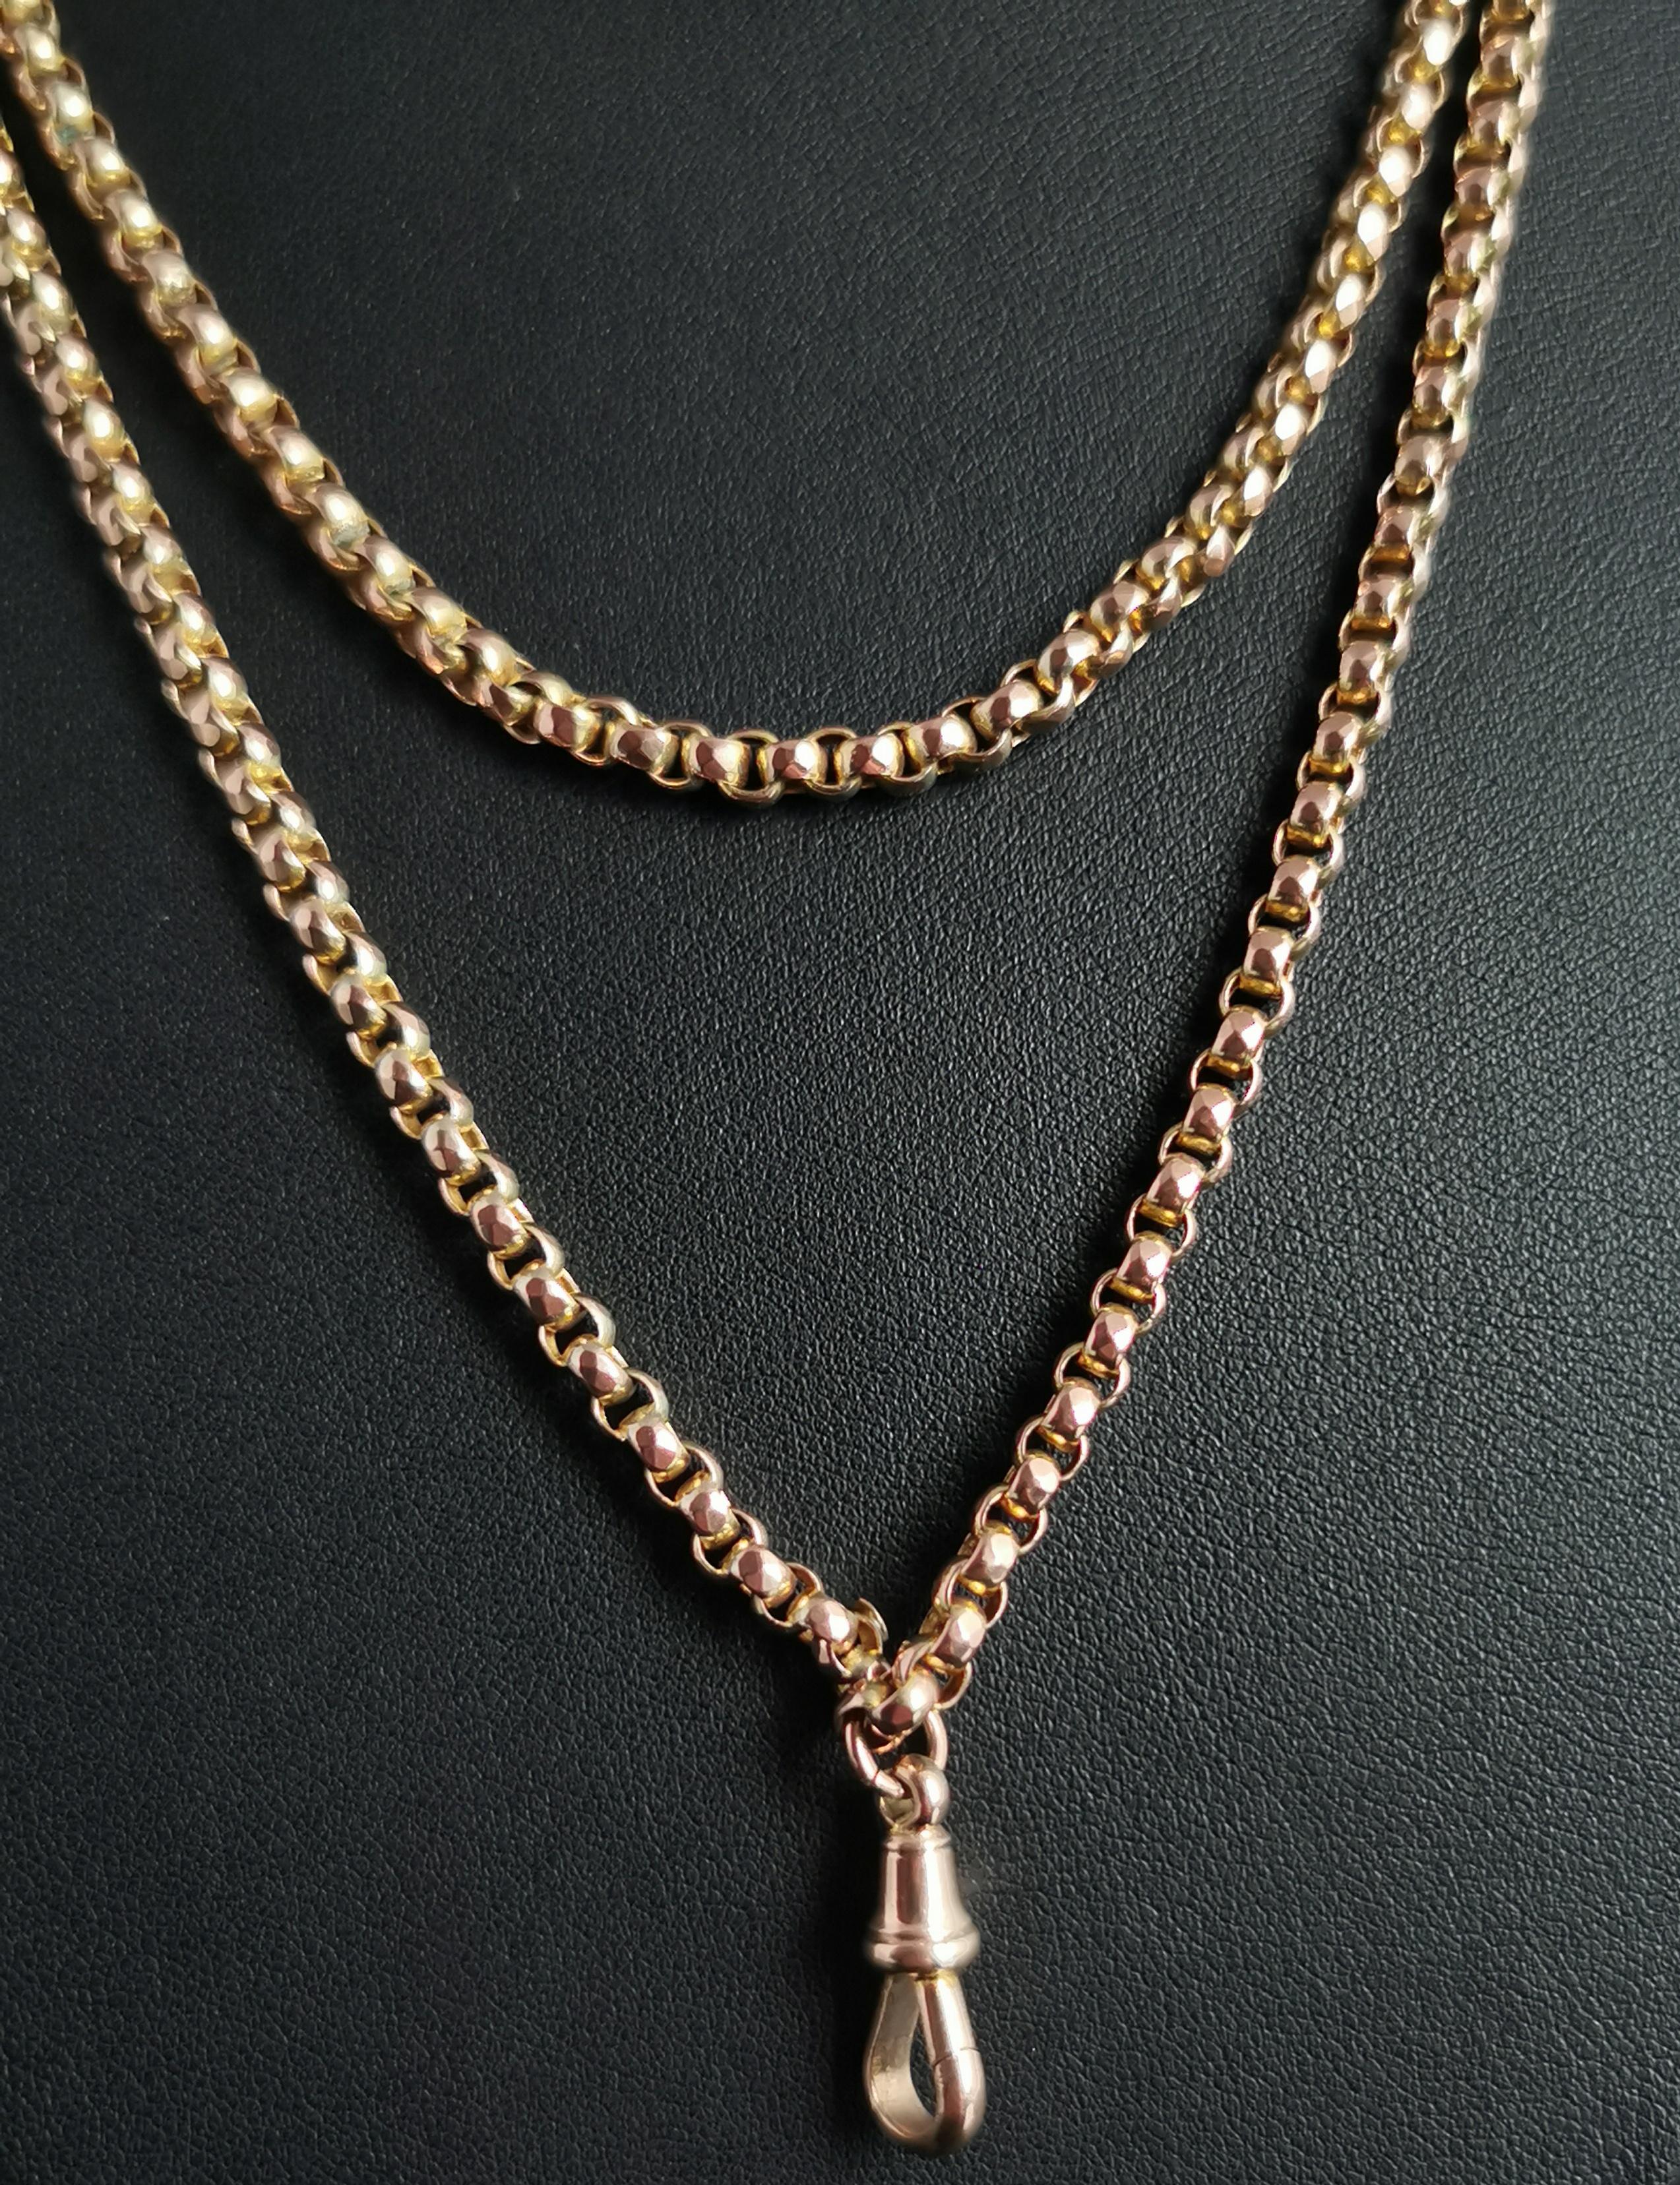 Antique 9k Yellow Gold Longuard Chain Necklace, Muff Chain, Victorian 10